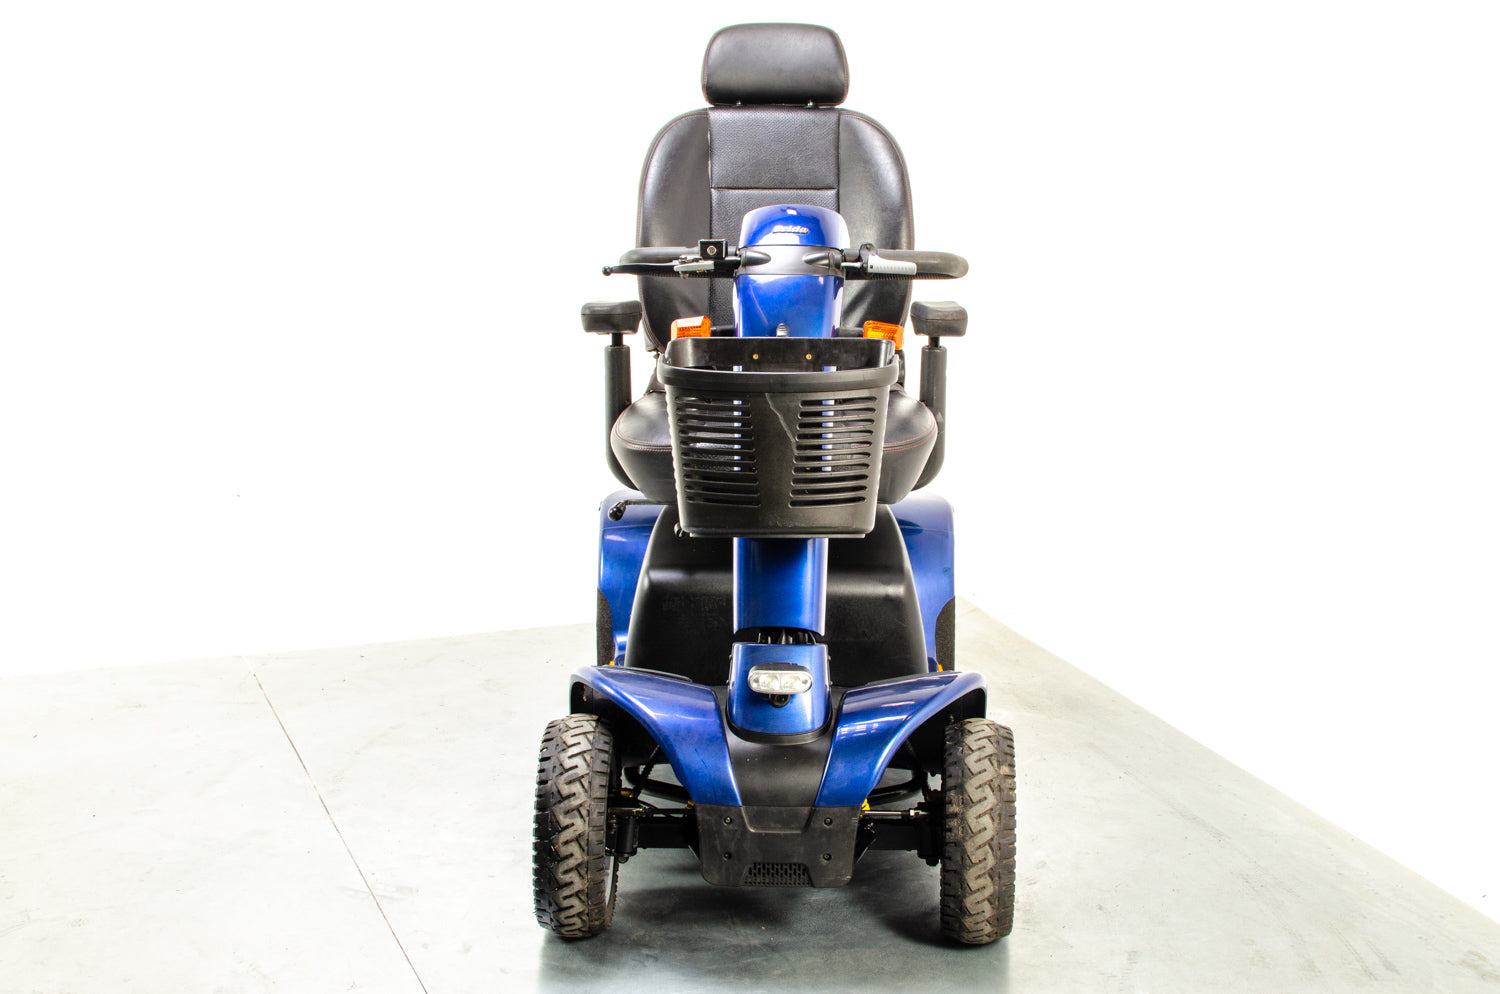 Pride Colt Pursuit Used Mobility Scooter 8mph Large All-Terrain Transportable